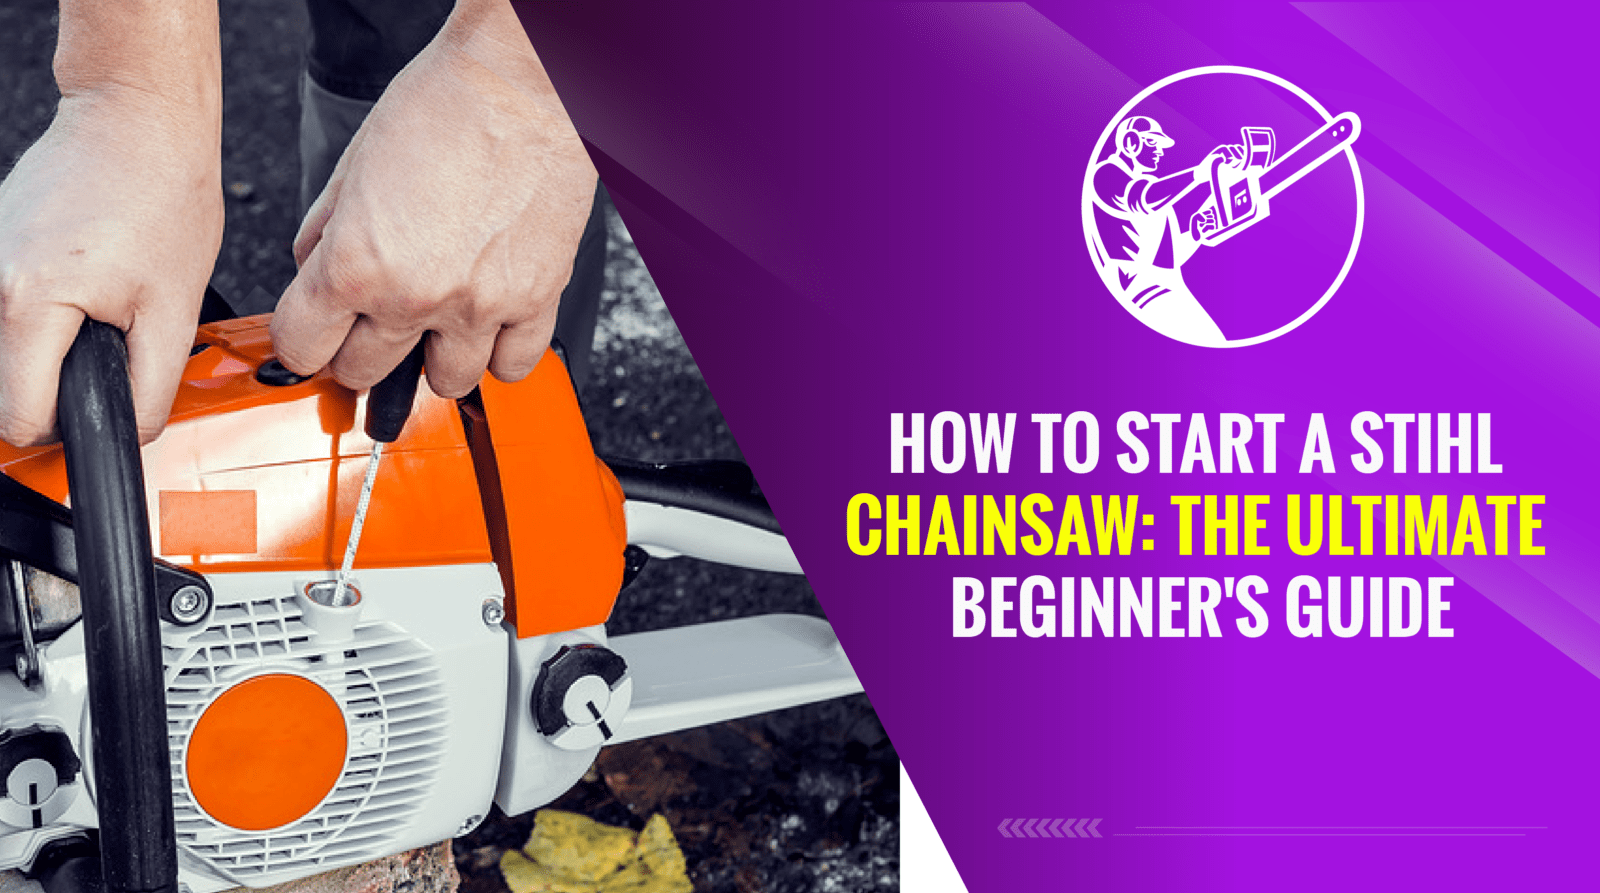 How to Start a Stihl Chainsaw The Ultimate Beginner's Guide